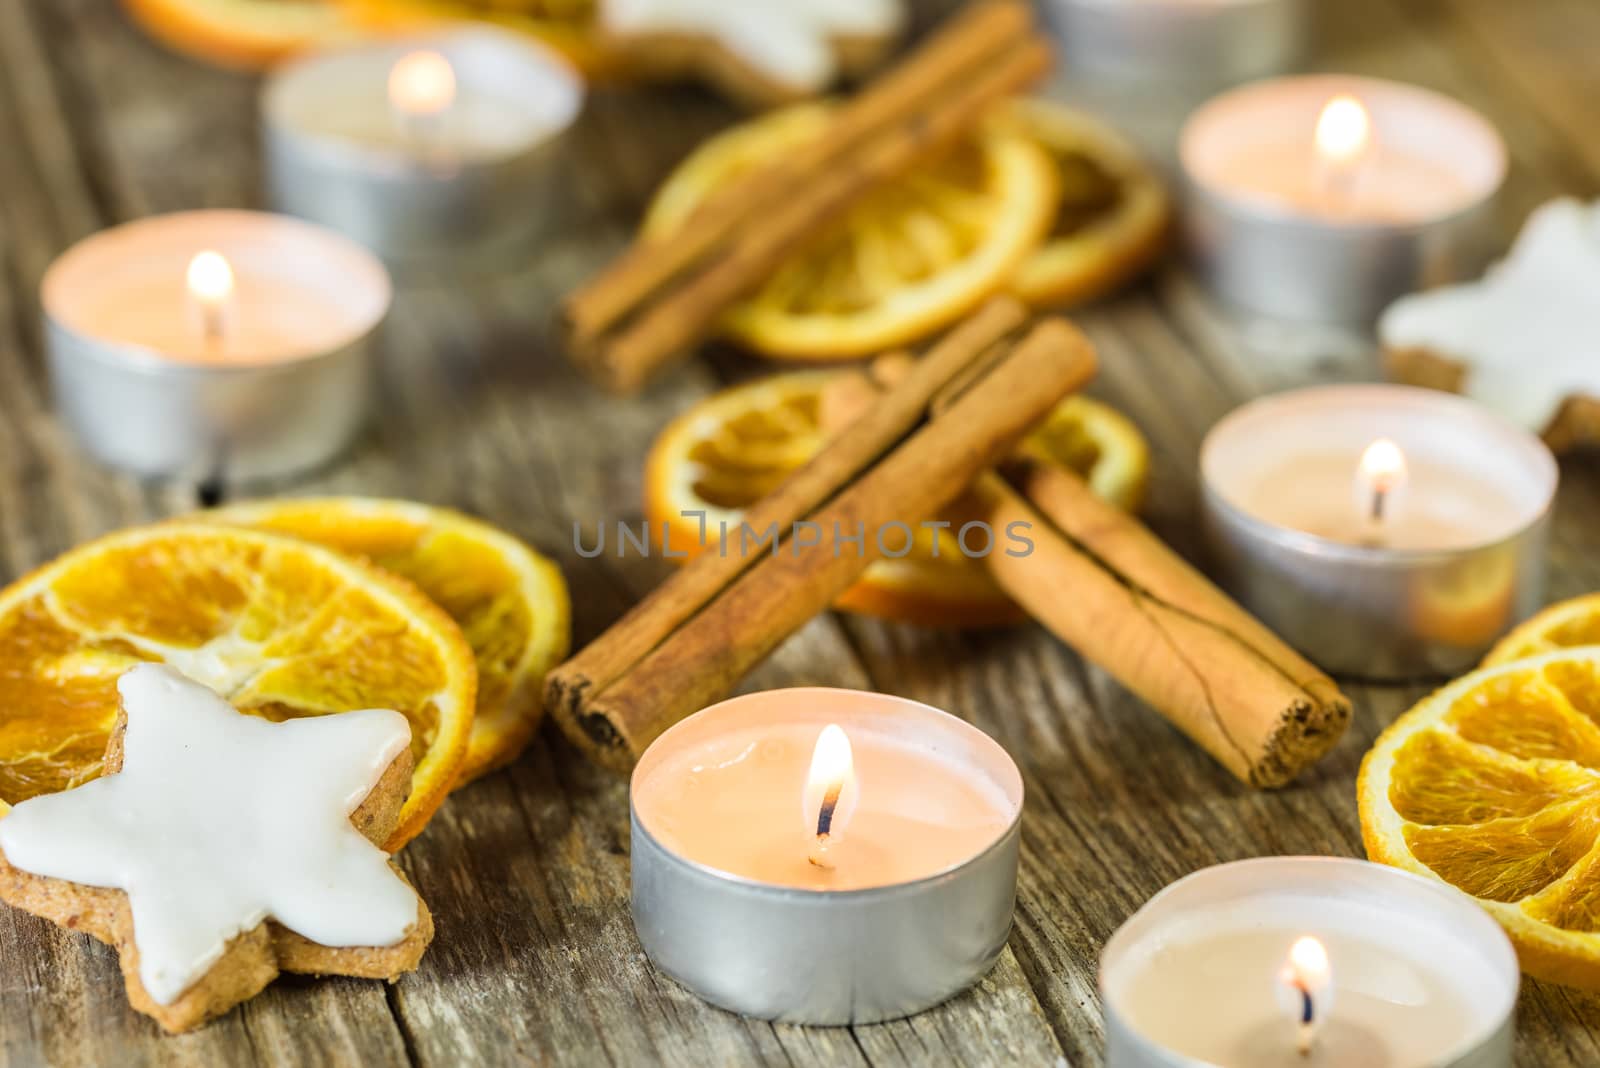 Christmas composition with candles, star shape cookies, cinnamon and orange slices